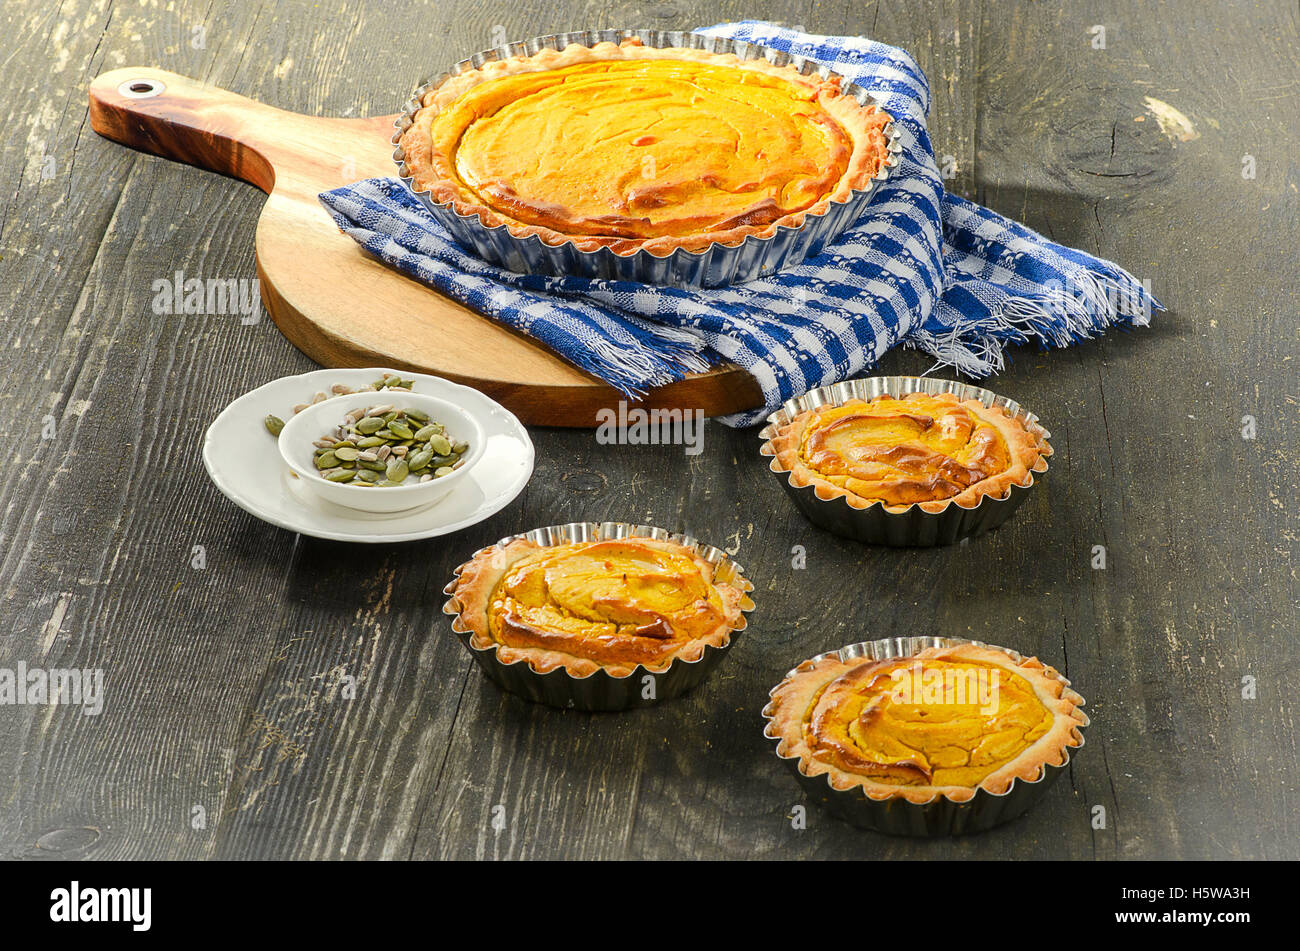 Pumpkin Pie for Thanksgiving  on rustic table. Stock Photo